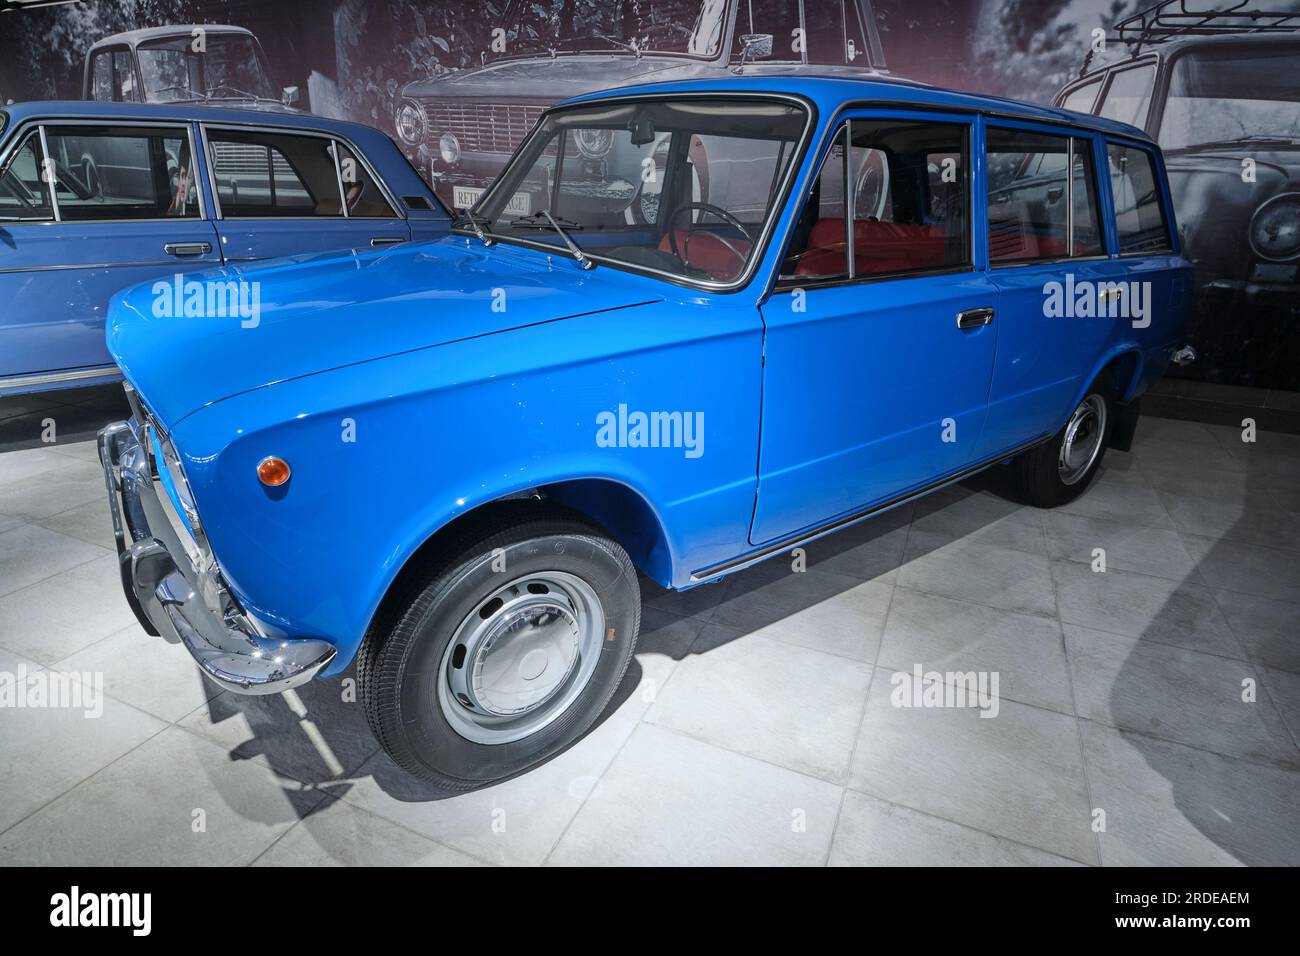 A view of a 1970's blue Lada Kombi wagon, model VAZ-2102. At the Retro Garage Car Museum of vintage automobiles in Shymkent, Kazakhstan. Stock Photo